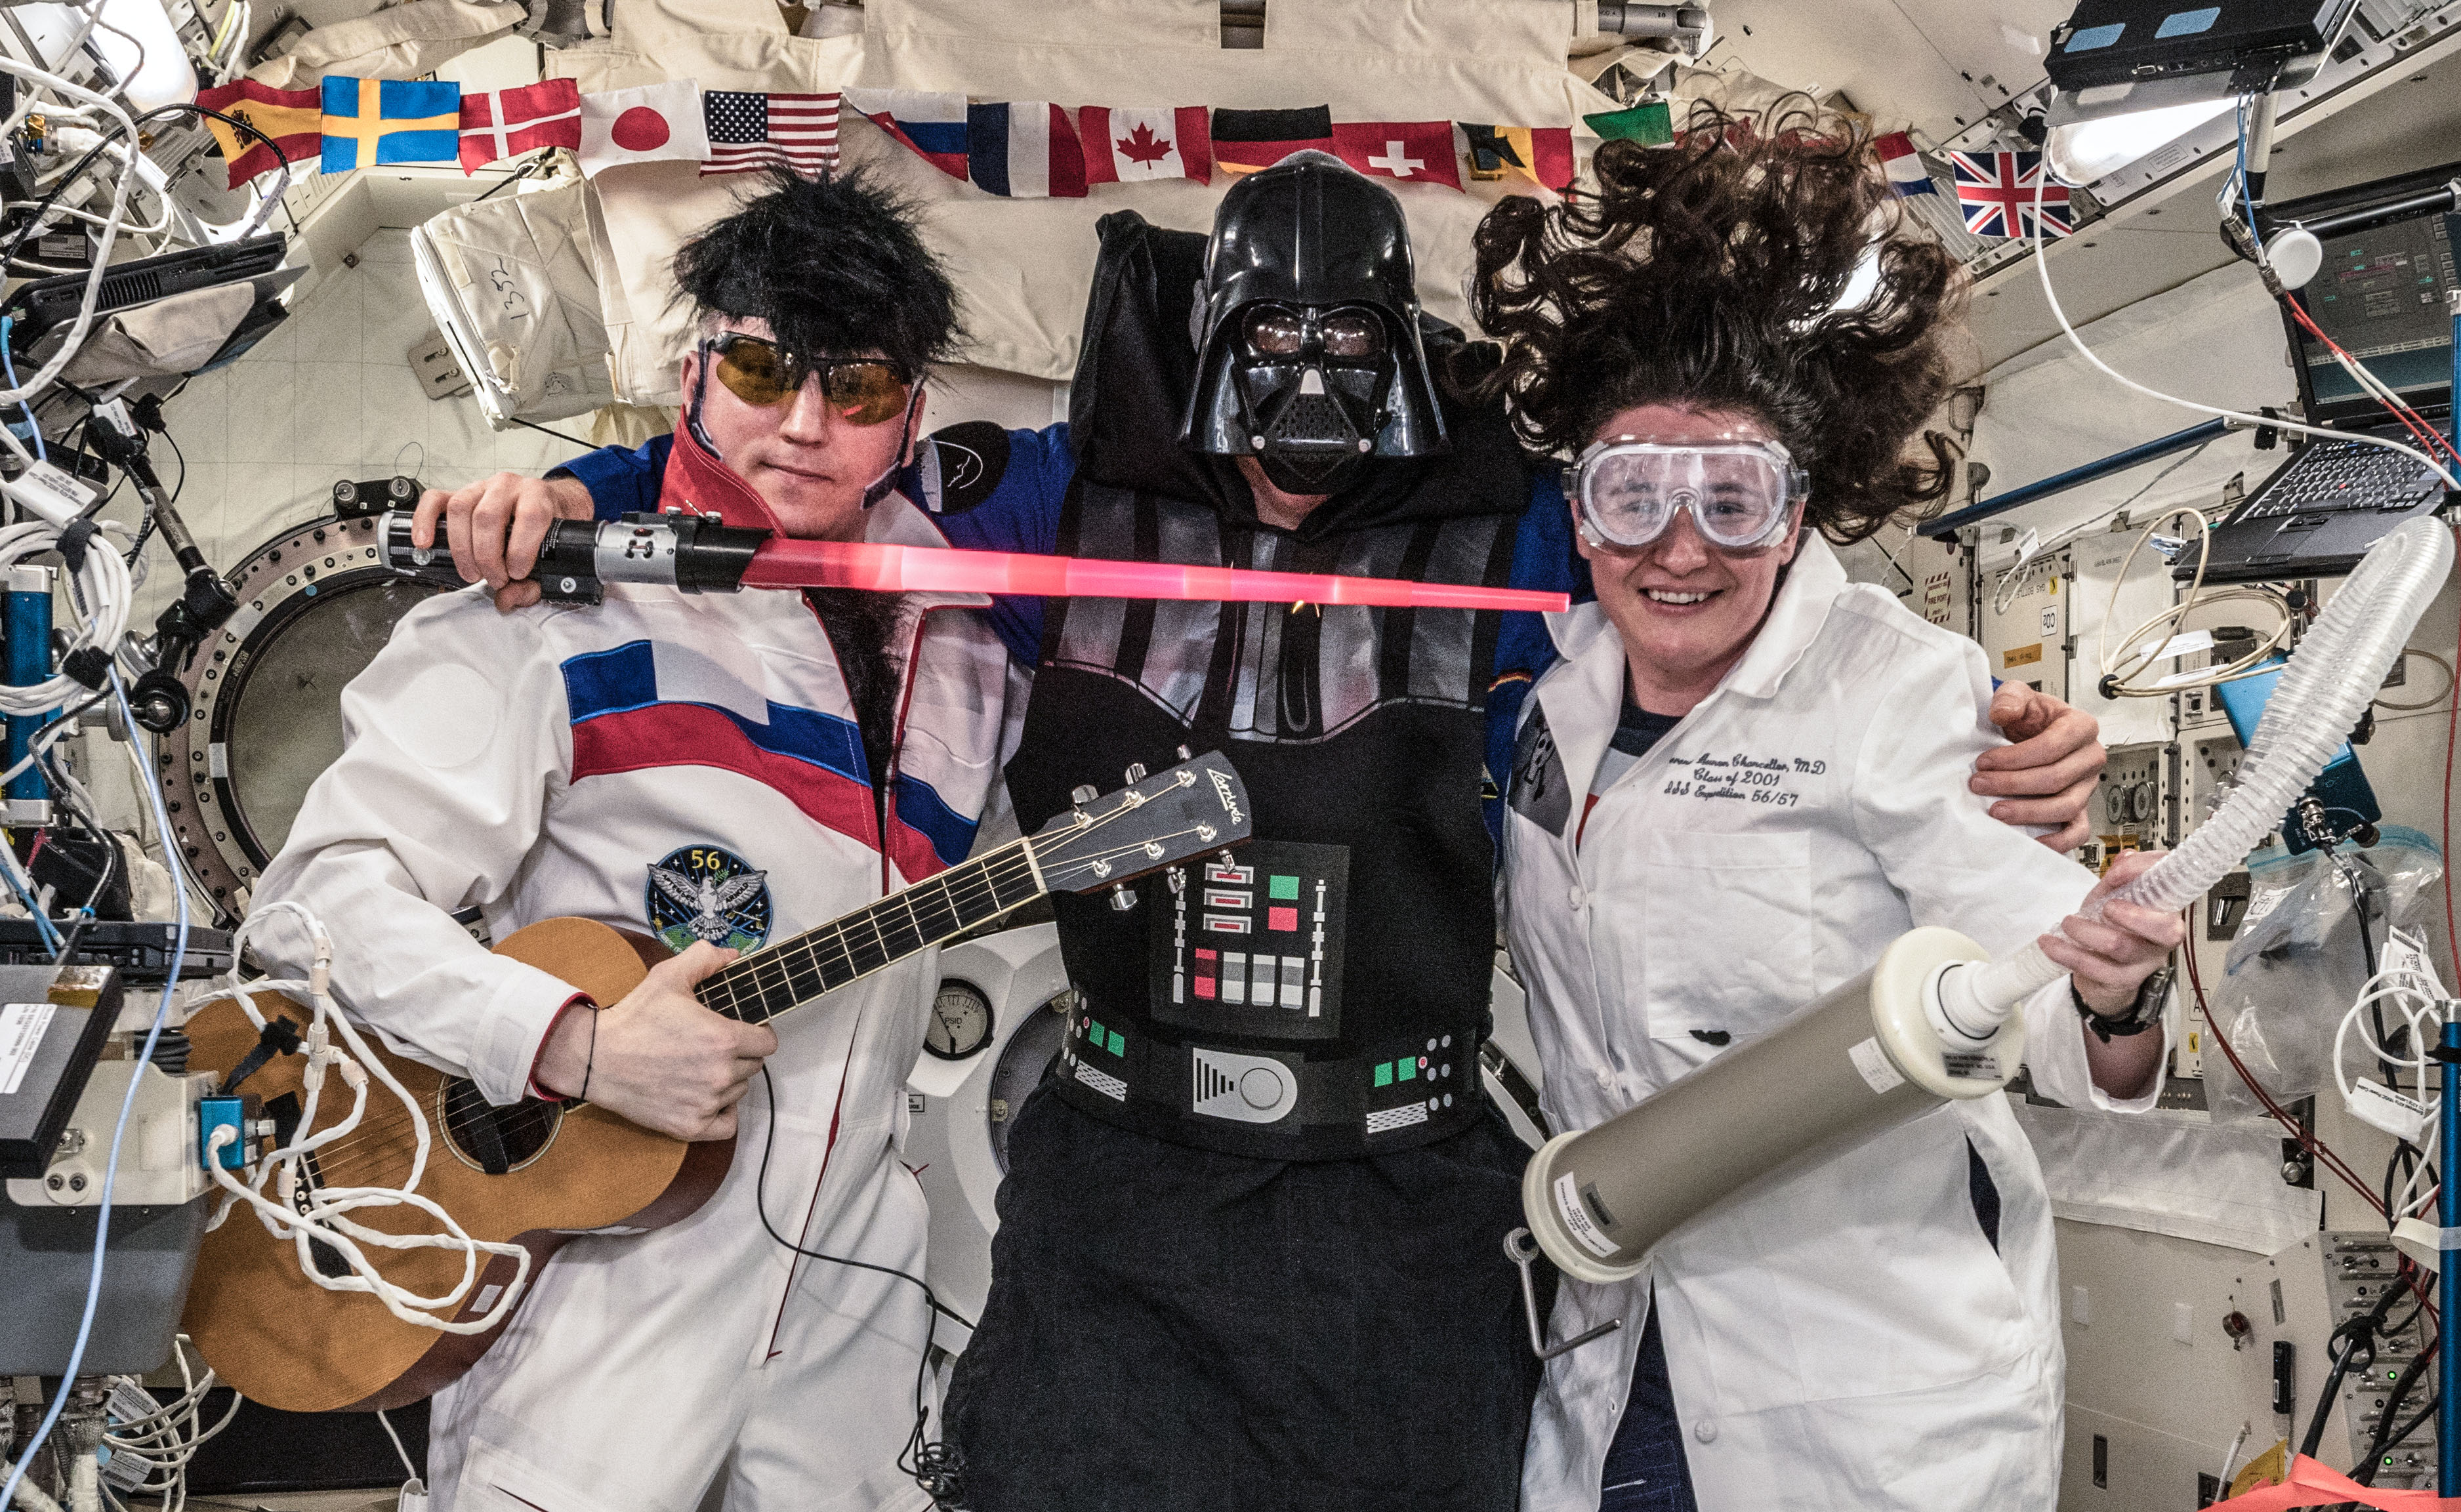 Expedition 57 crew members in their best Halloween outfits